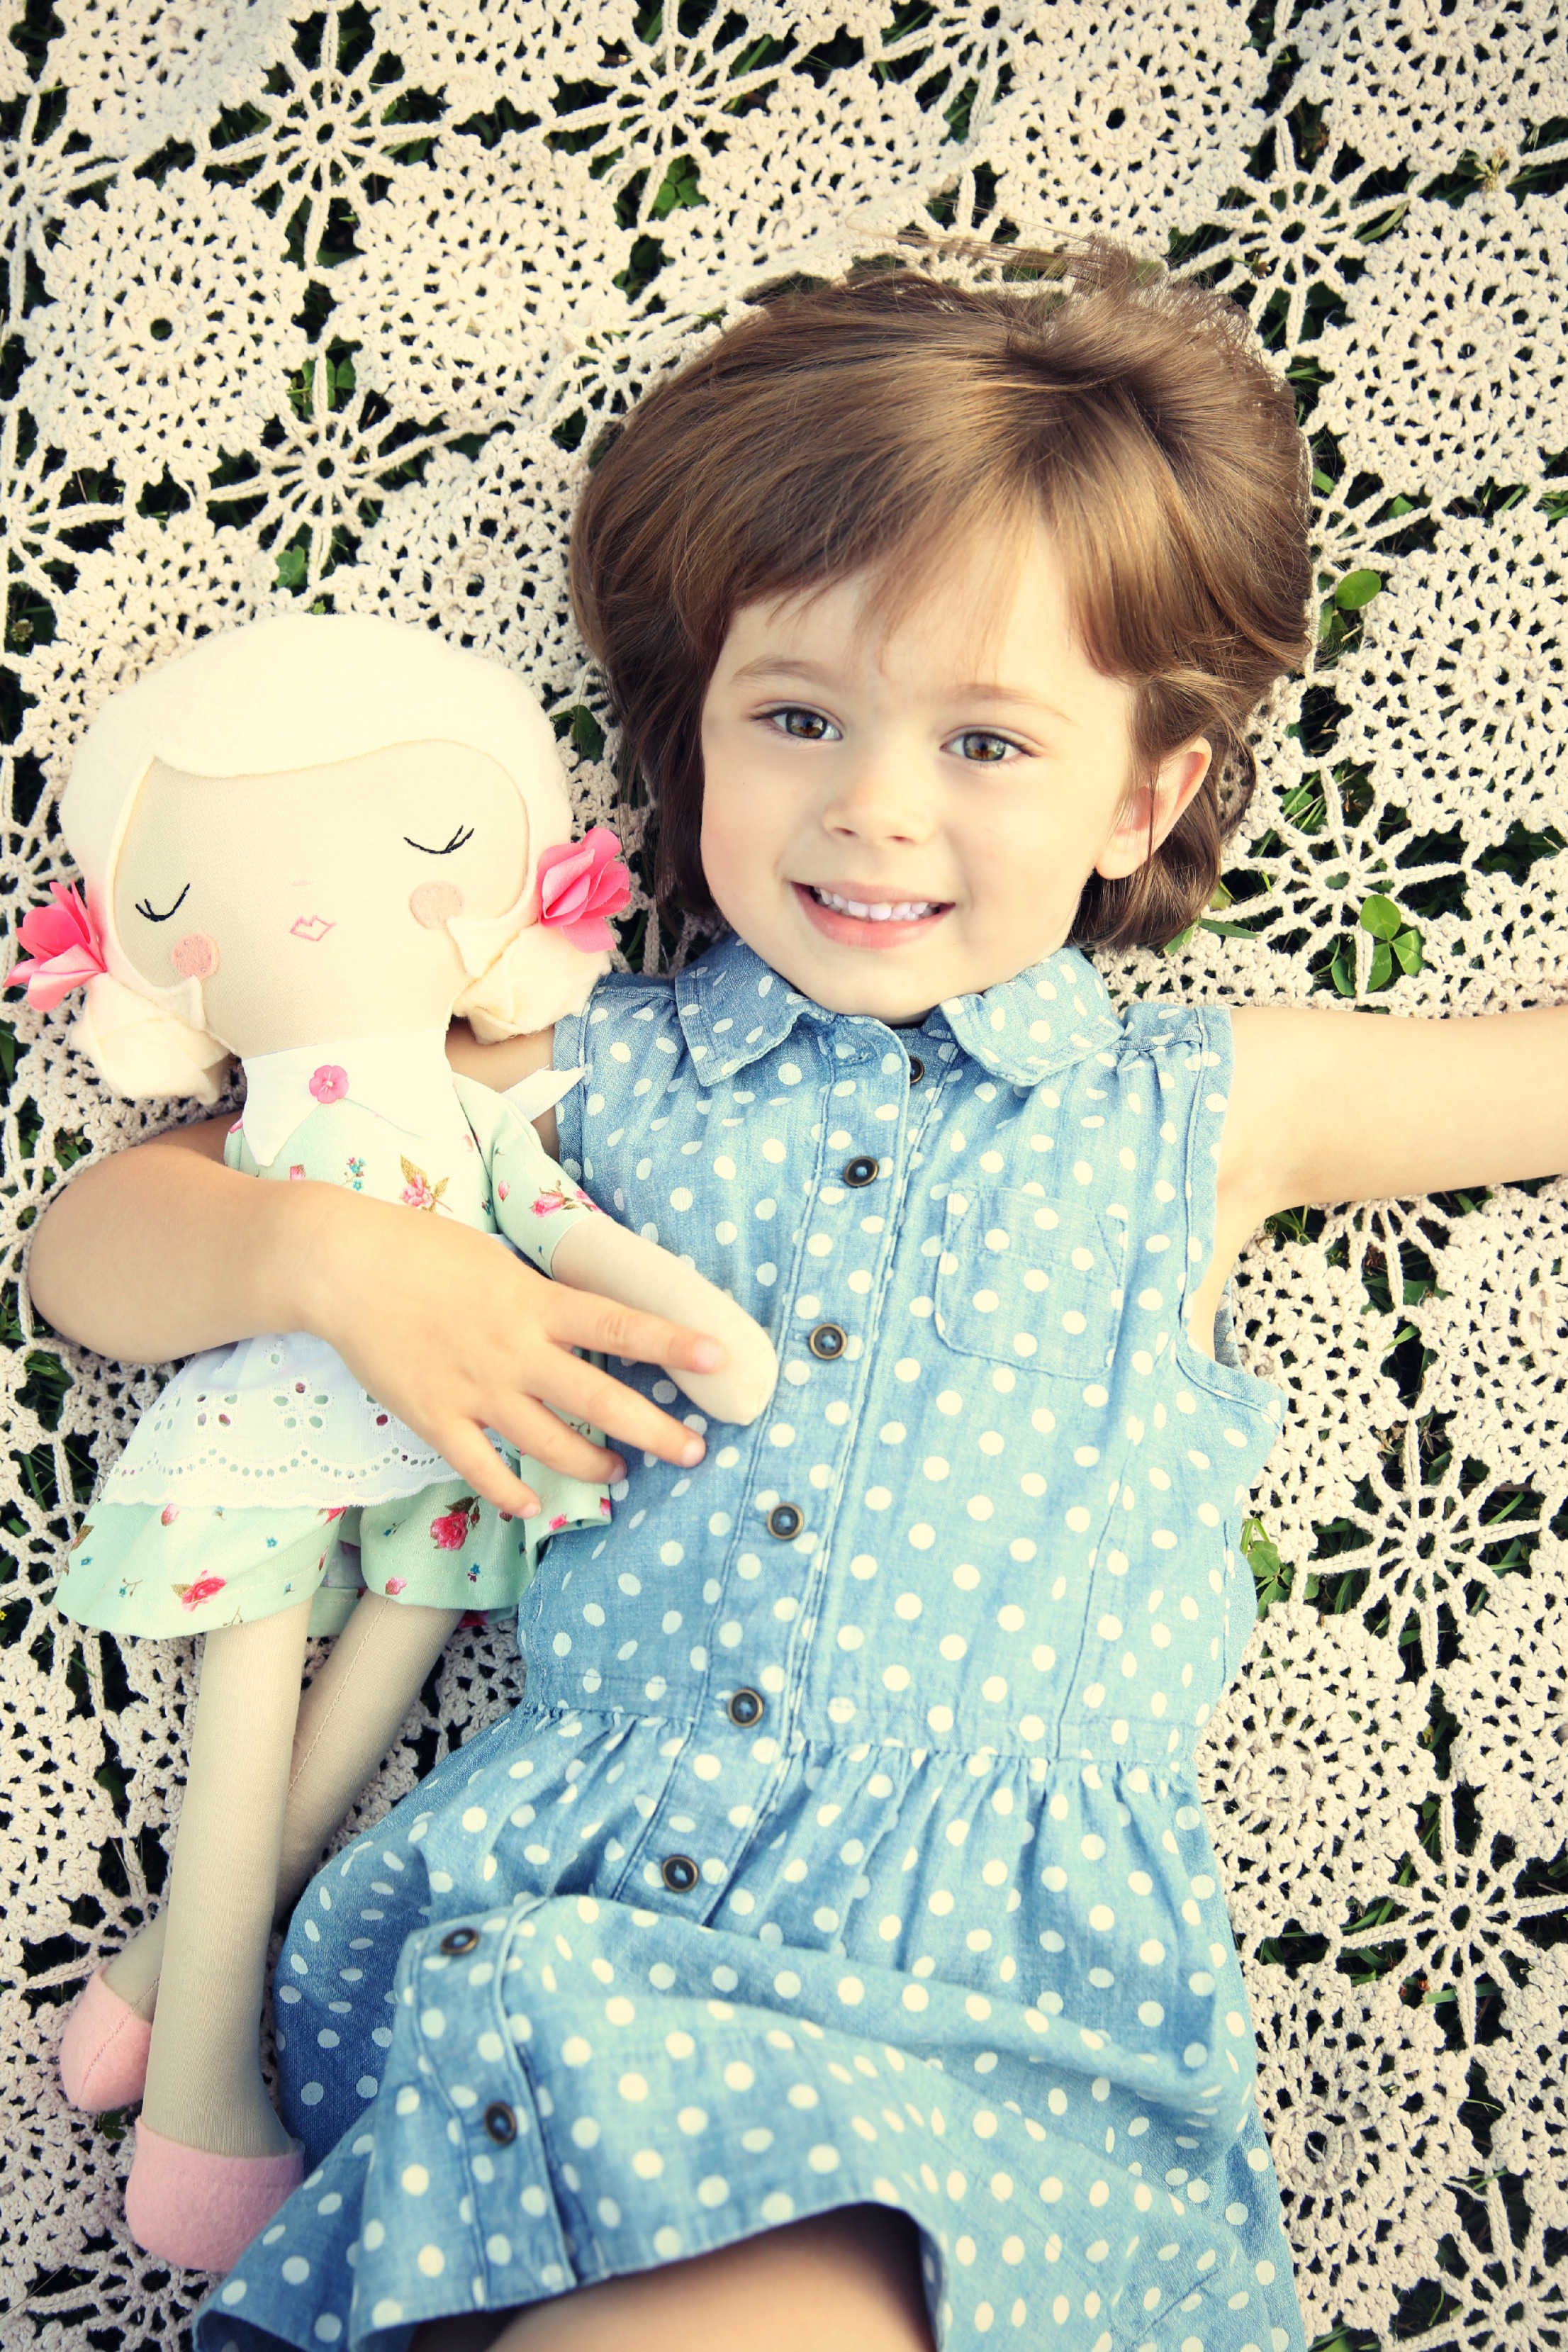 Handmade Doll by Spun Candy - House by Hoff